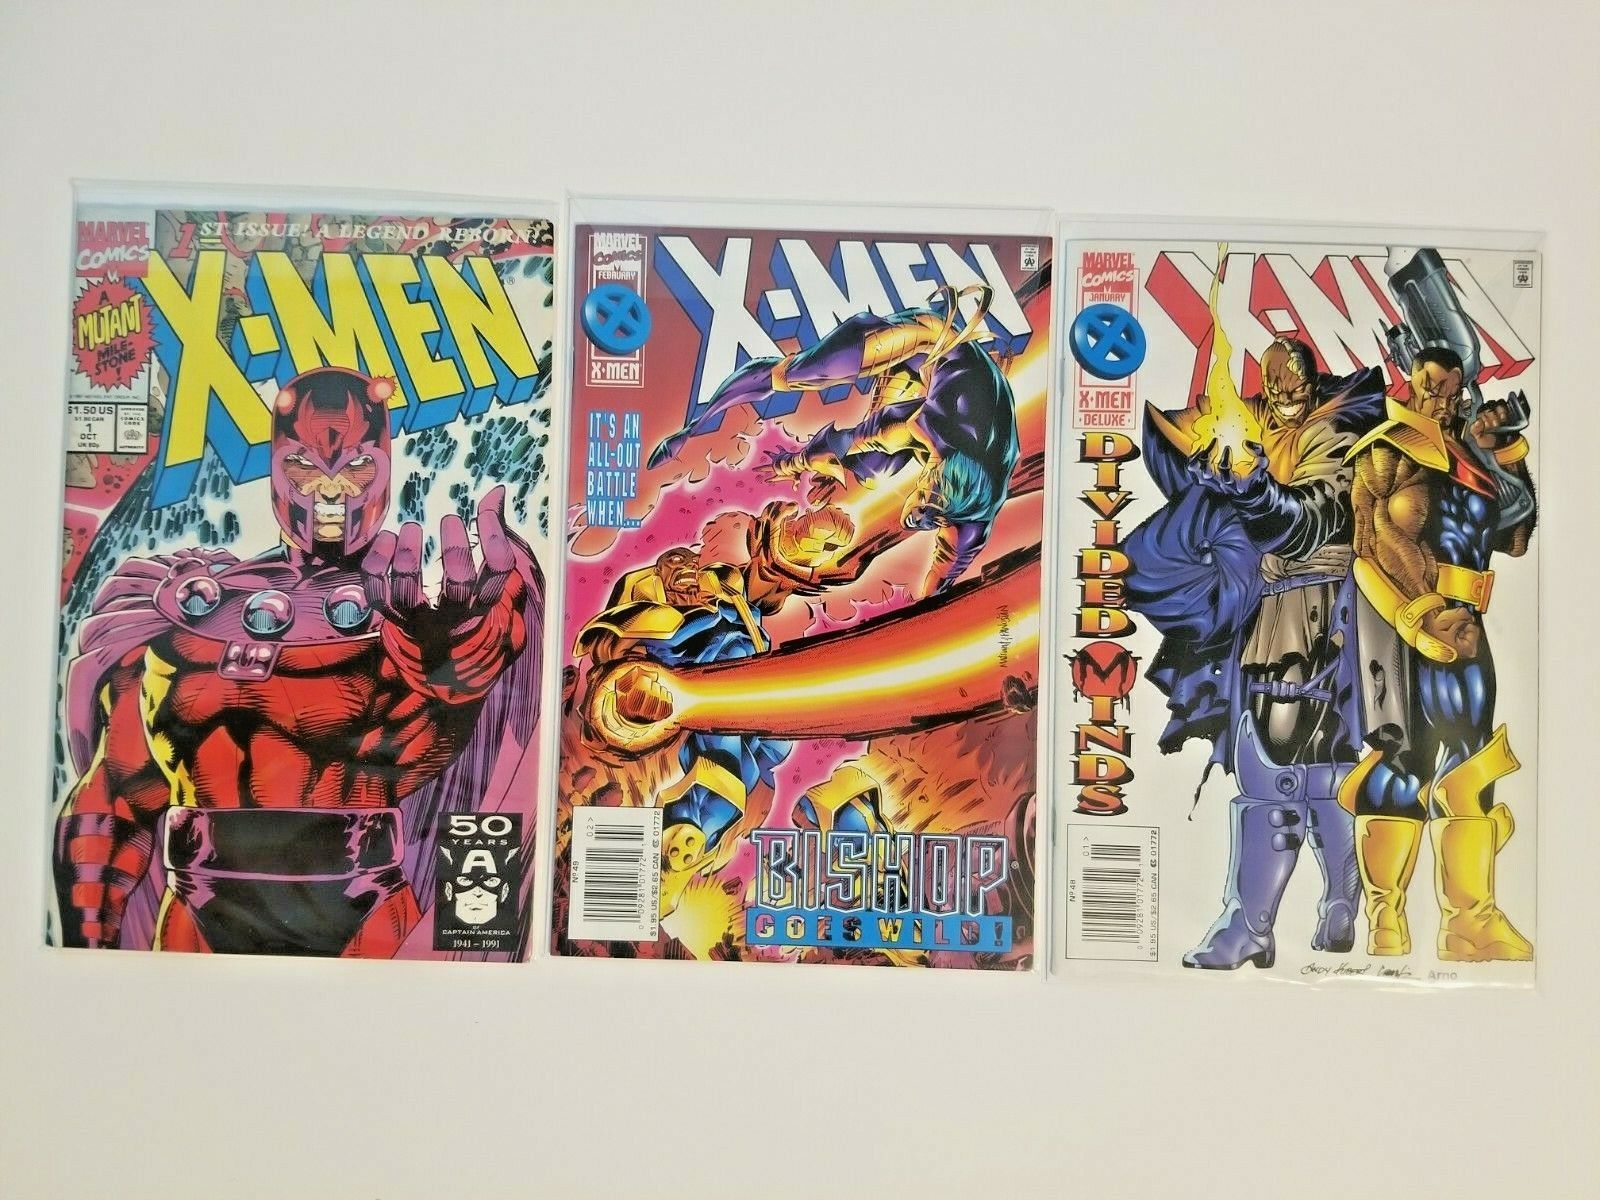 X-Men #1 Year 1991 Magneto Cover. X-Men Unlimited #48 and #49 LOT OF 3